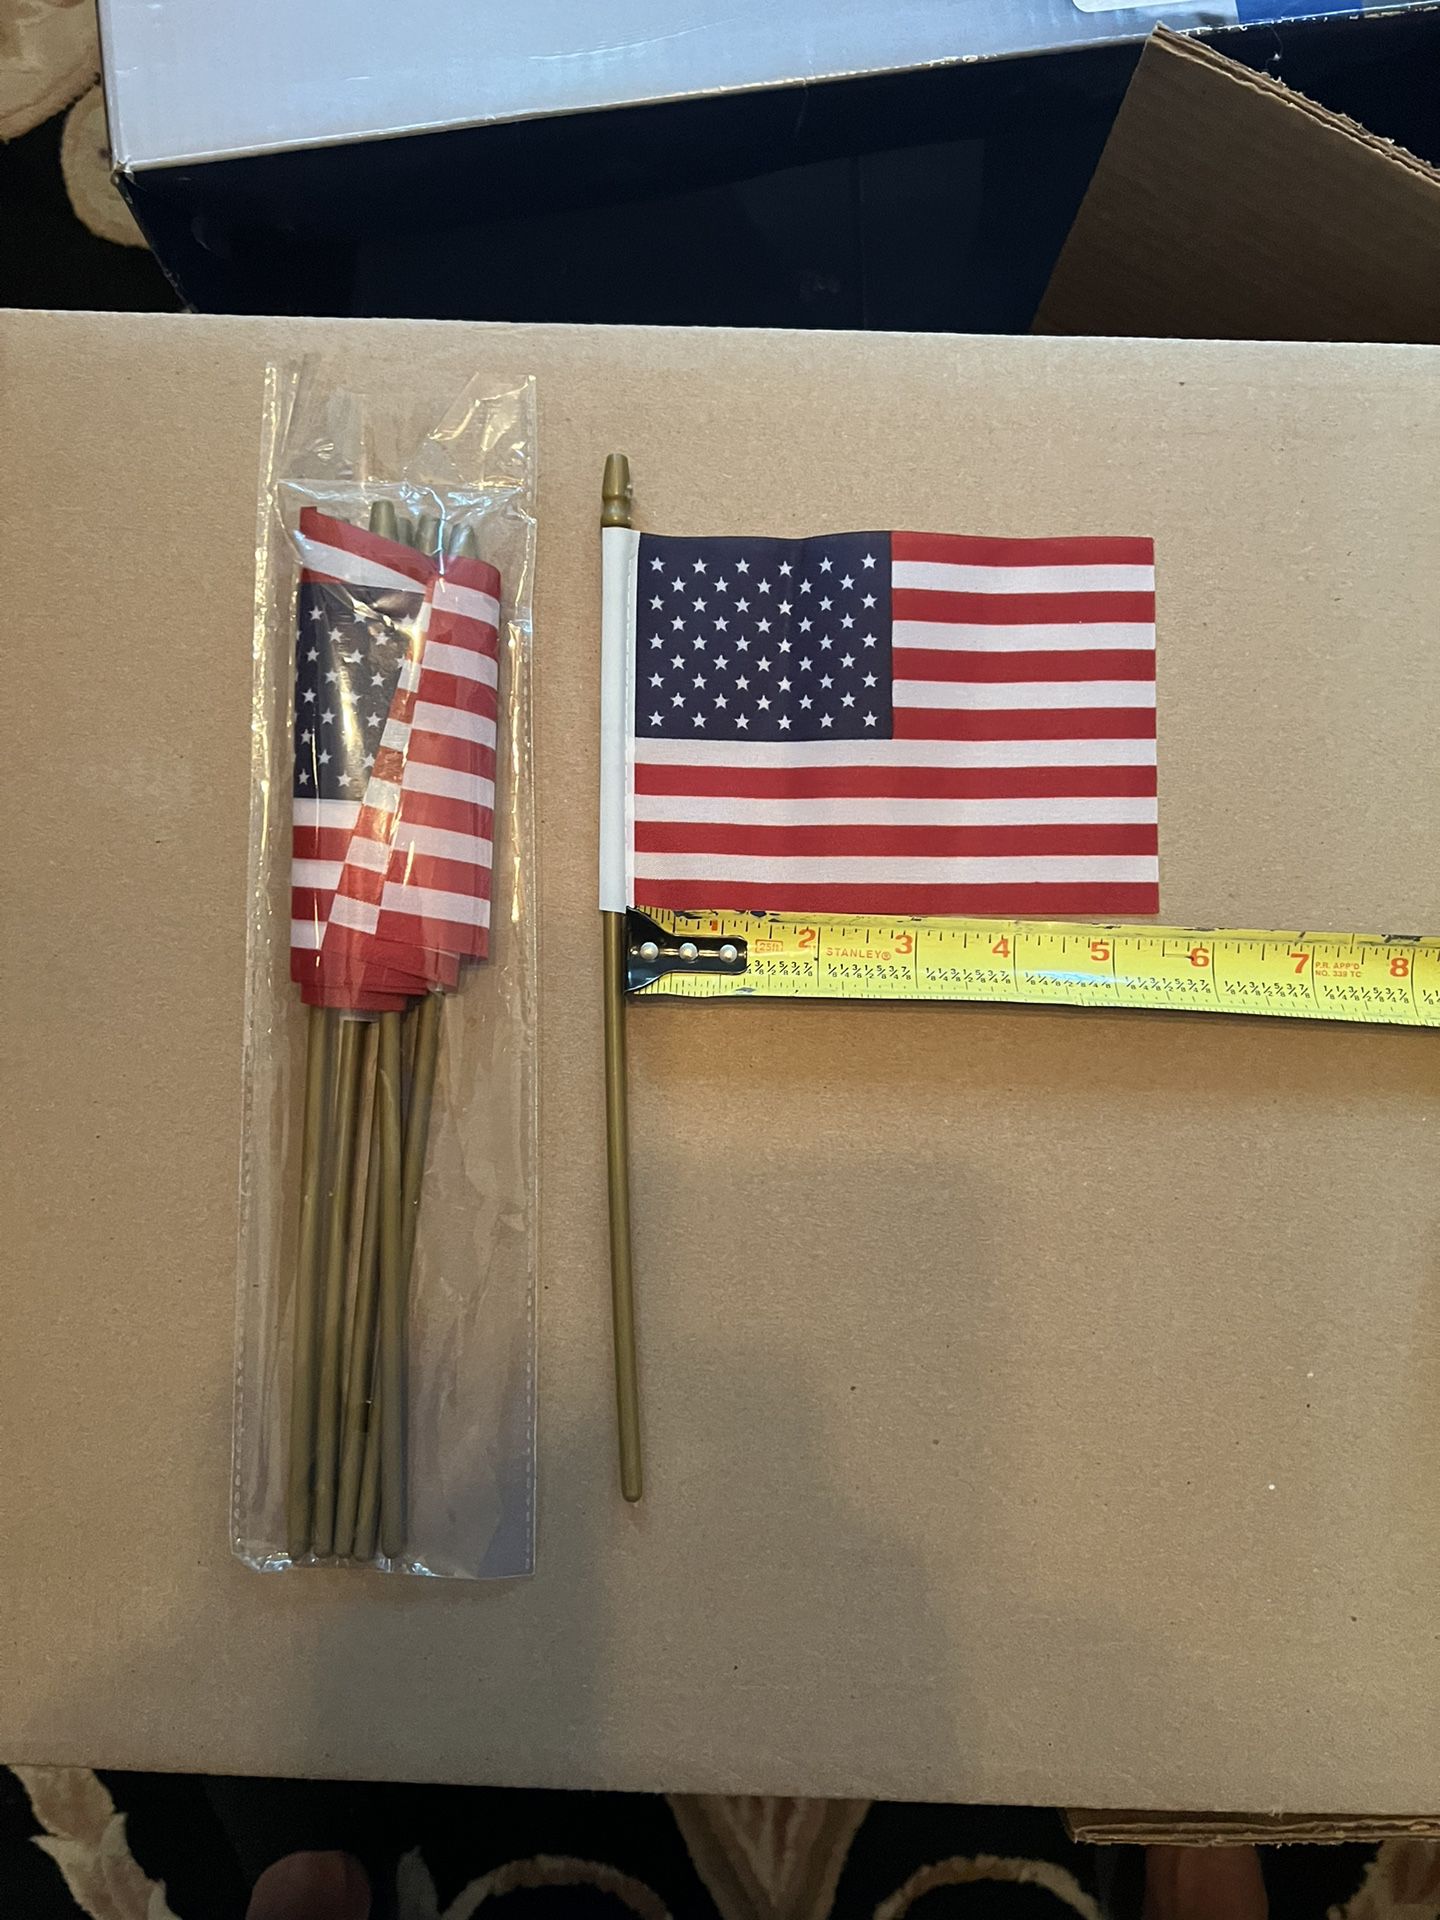 American Flags on Stick